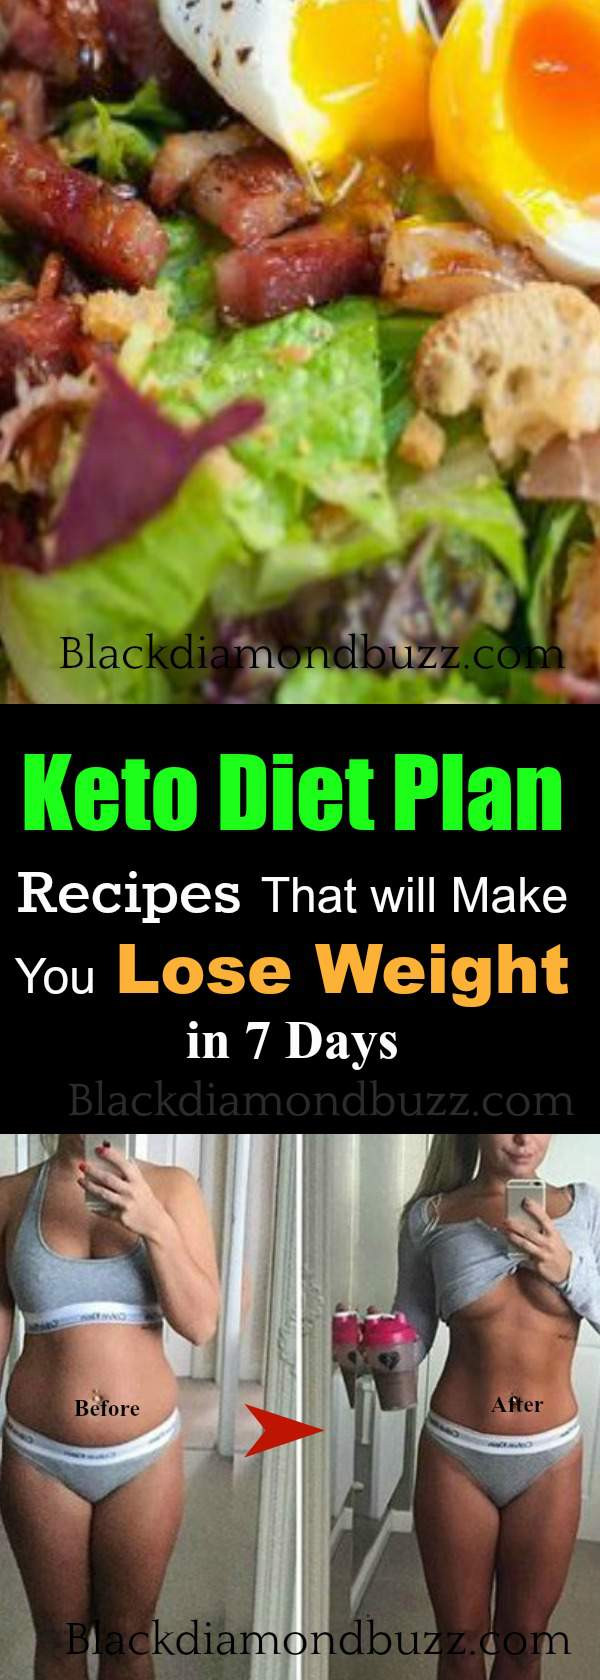 Ketosis Diet Recipes Losing Weight
 Keto Diet Plan Recipes That Will Make You Lose Weight in 7